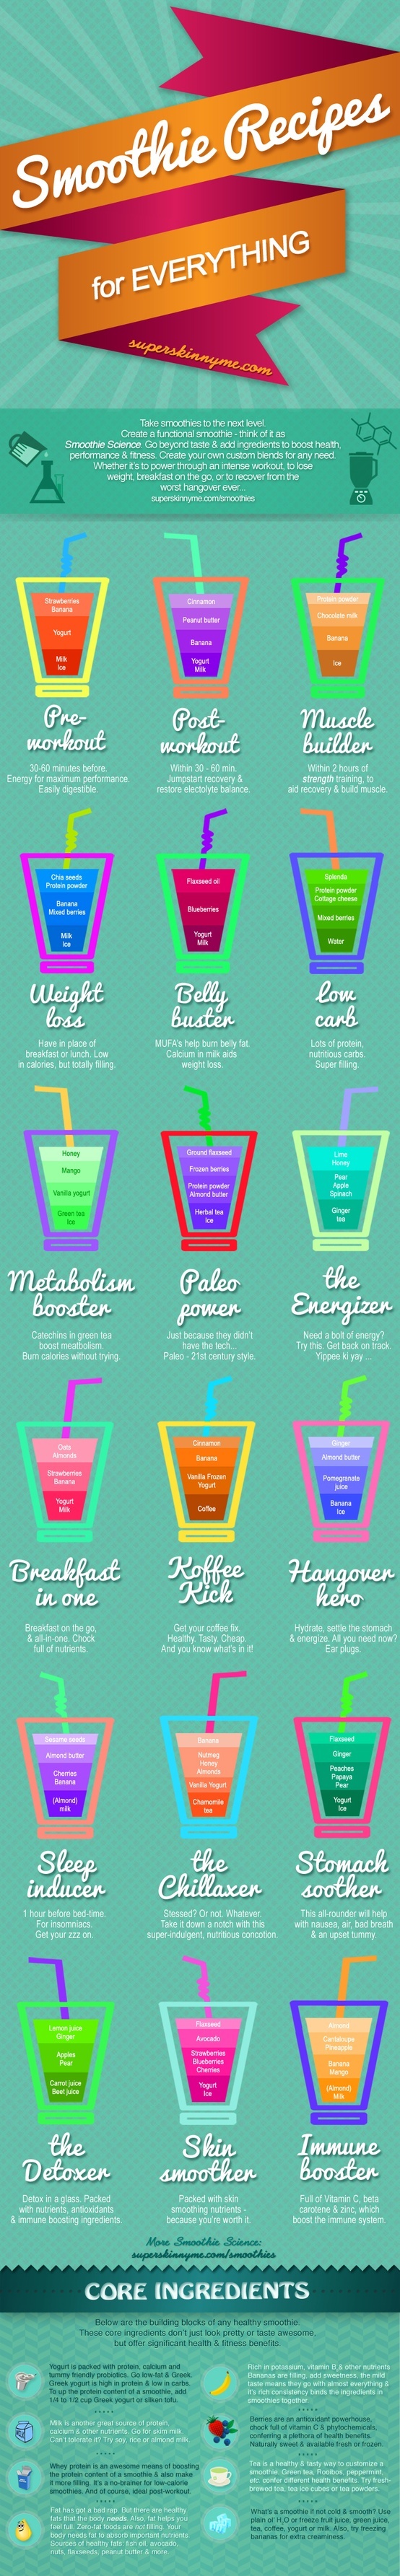 smoothie recipes for everything